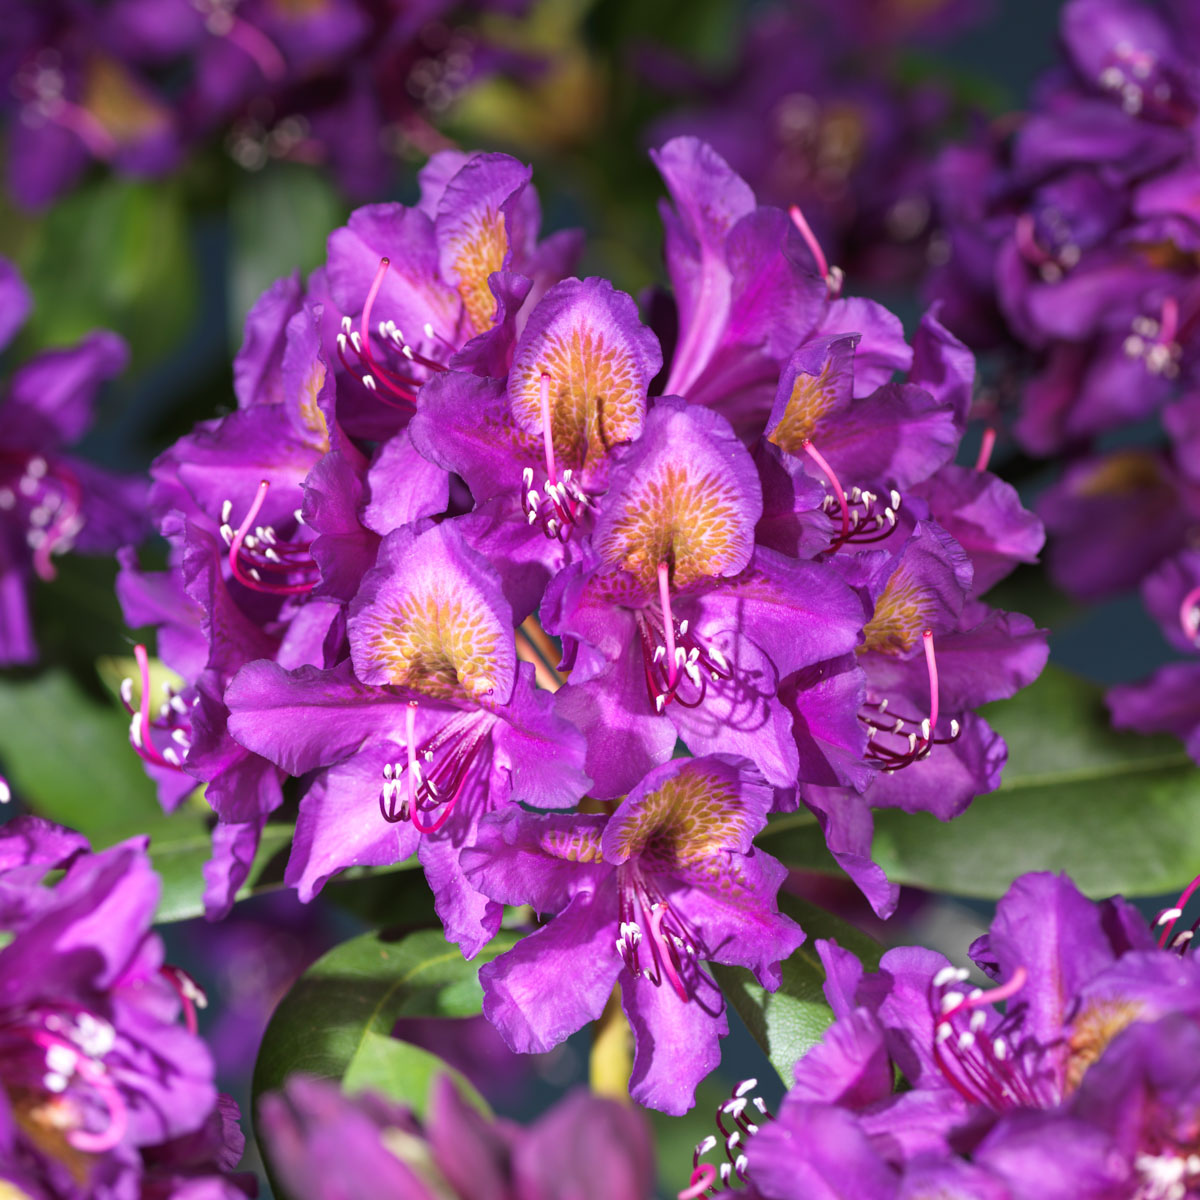 Rhododendron med lilla blomster